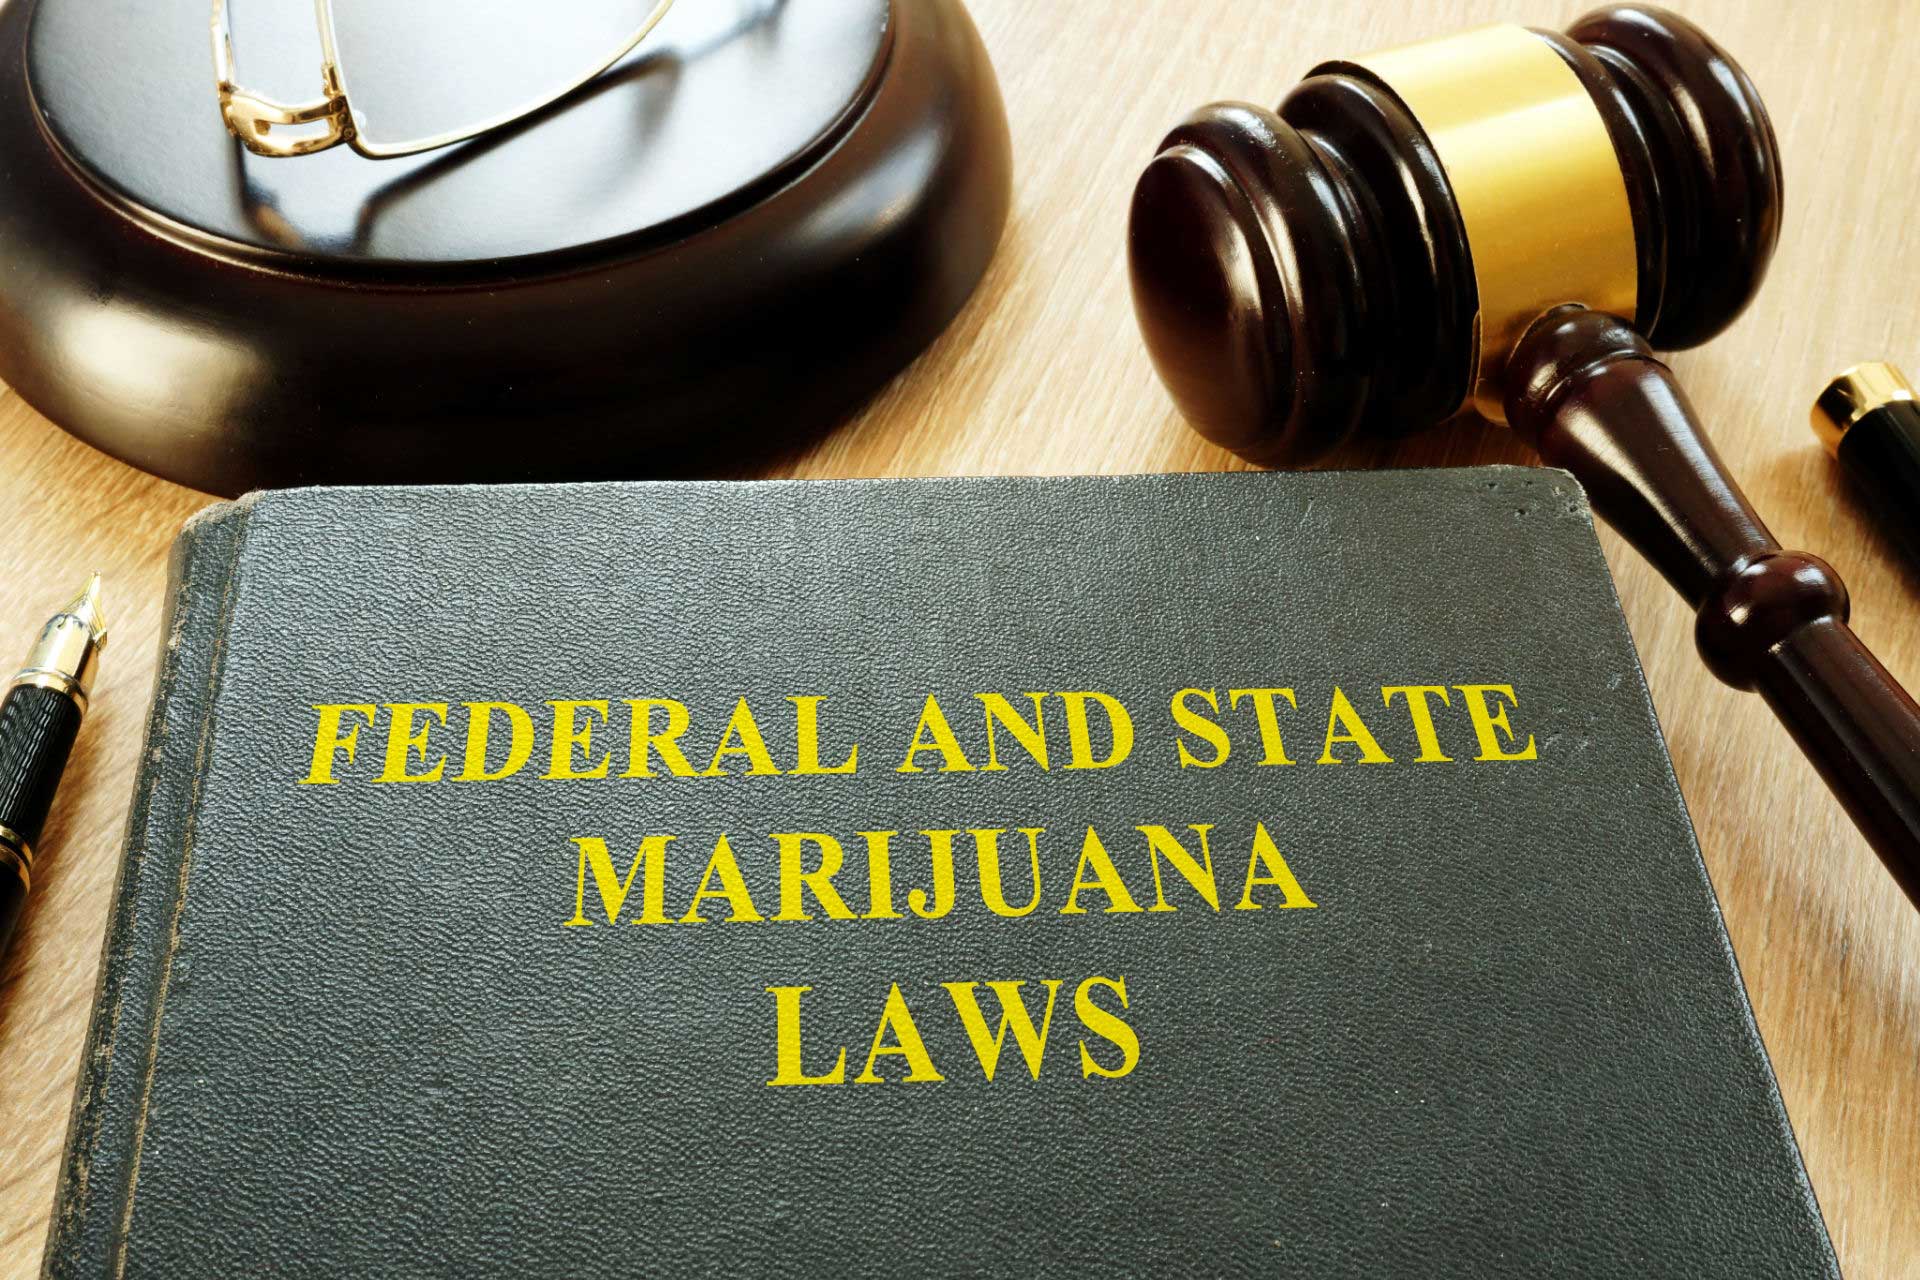 Book cover saying “Federal and State Marijuana Laws” which will change if cannabis is federally legalized.